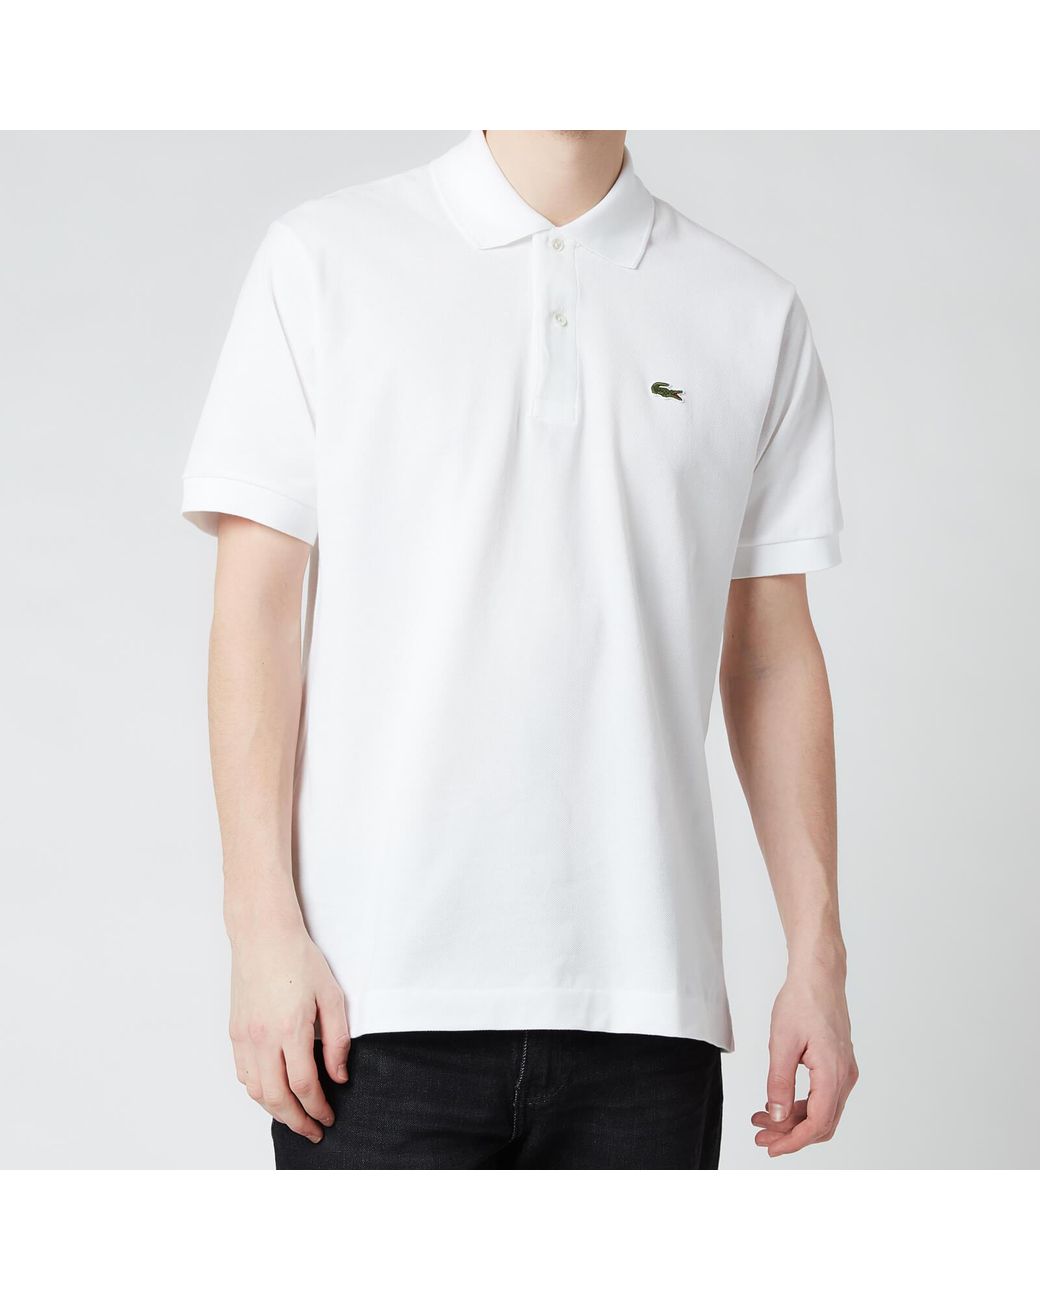 Lacoste Polo Shirt in White classic two button in cotton pique short sleeved 